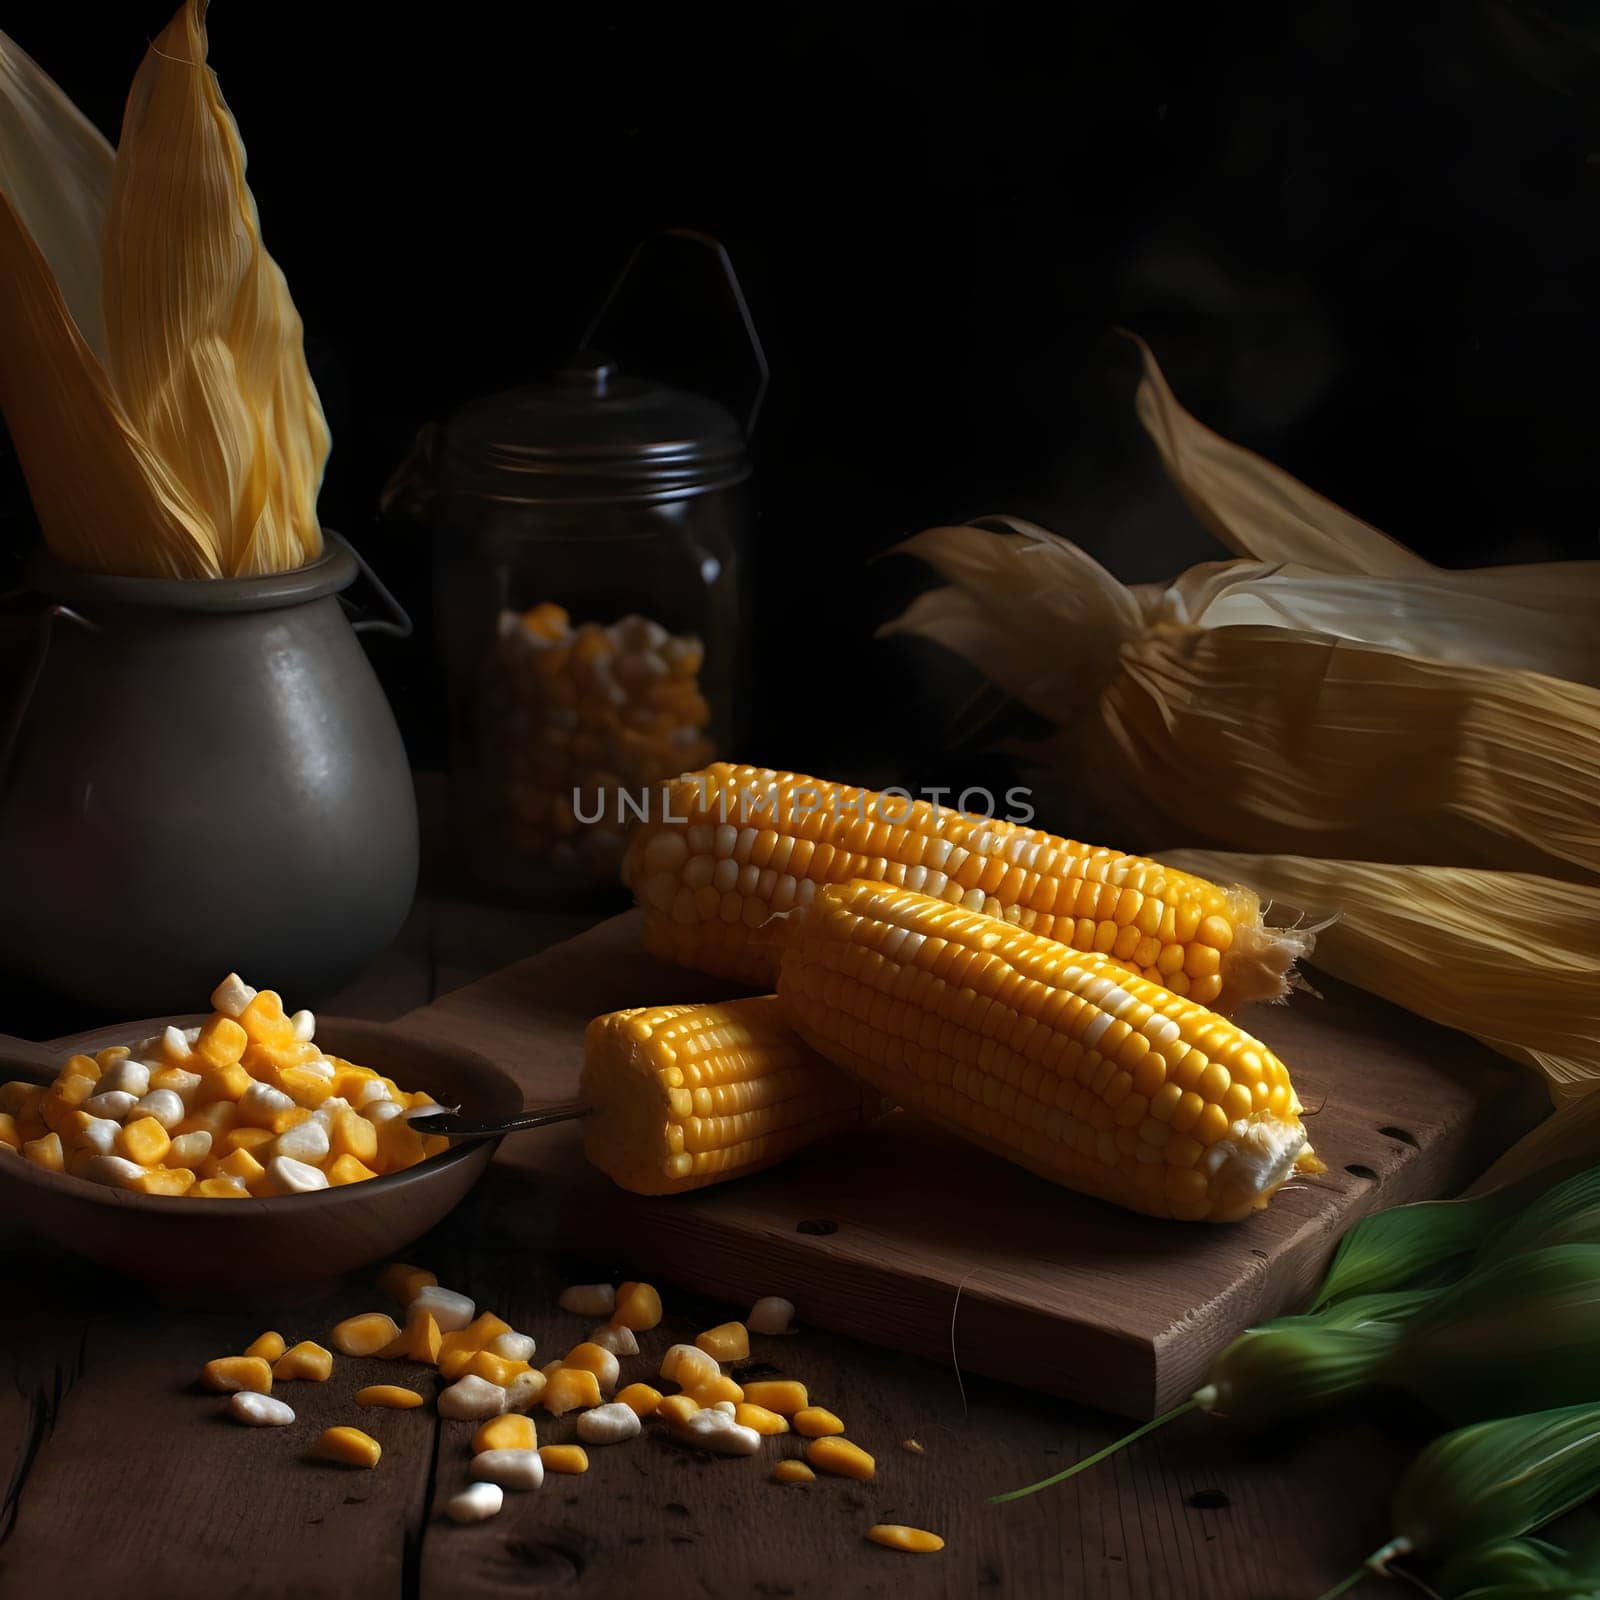 Yellow corn cobs on a kitchen board around corn kernels and leaves dark background. Corn as a dish of thanksgiving for the harvest. An atmosphere of joy and celebration.